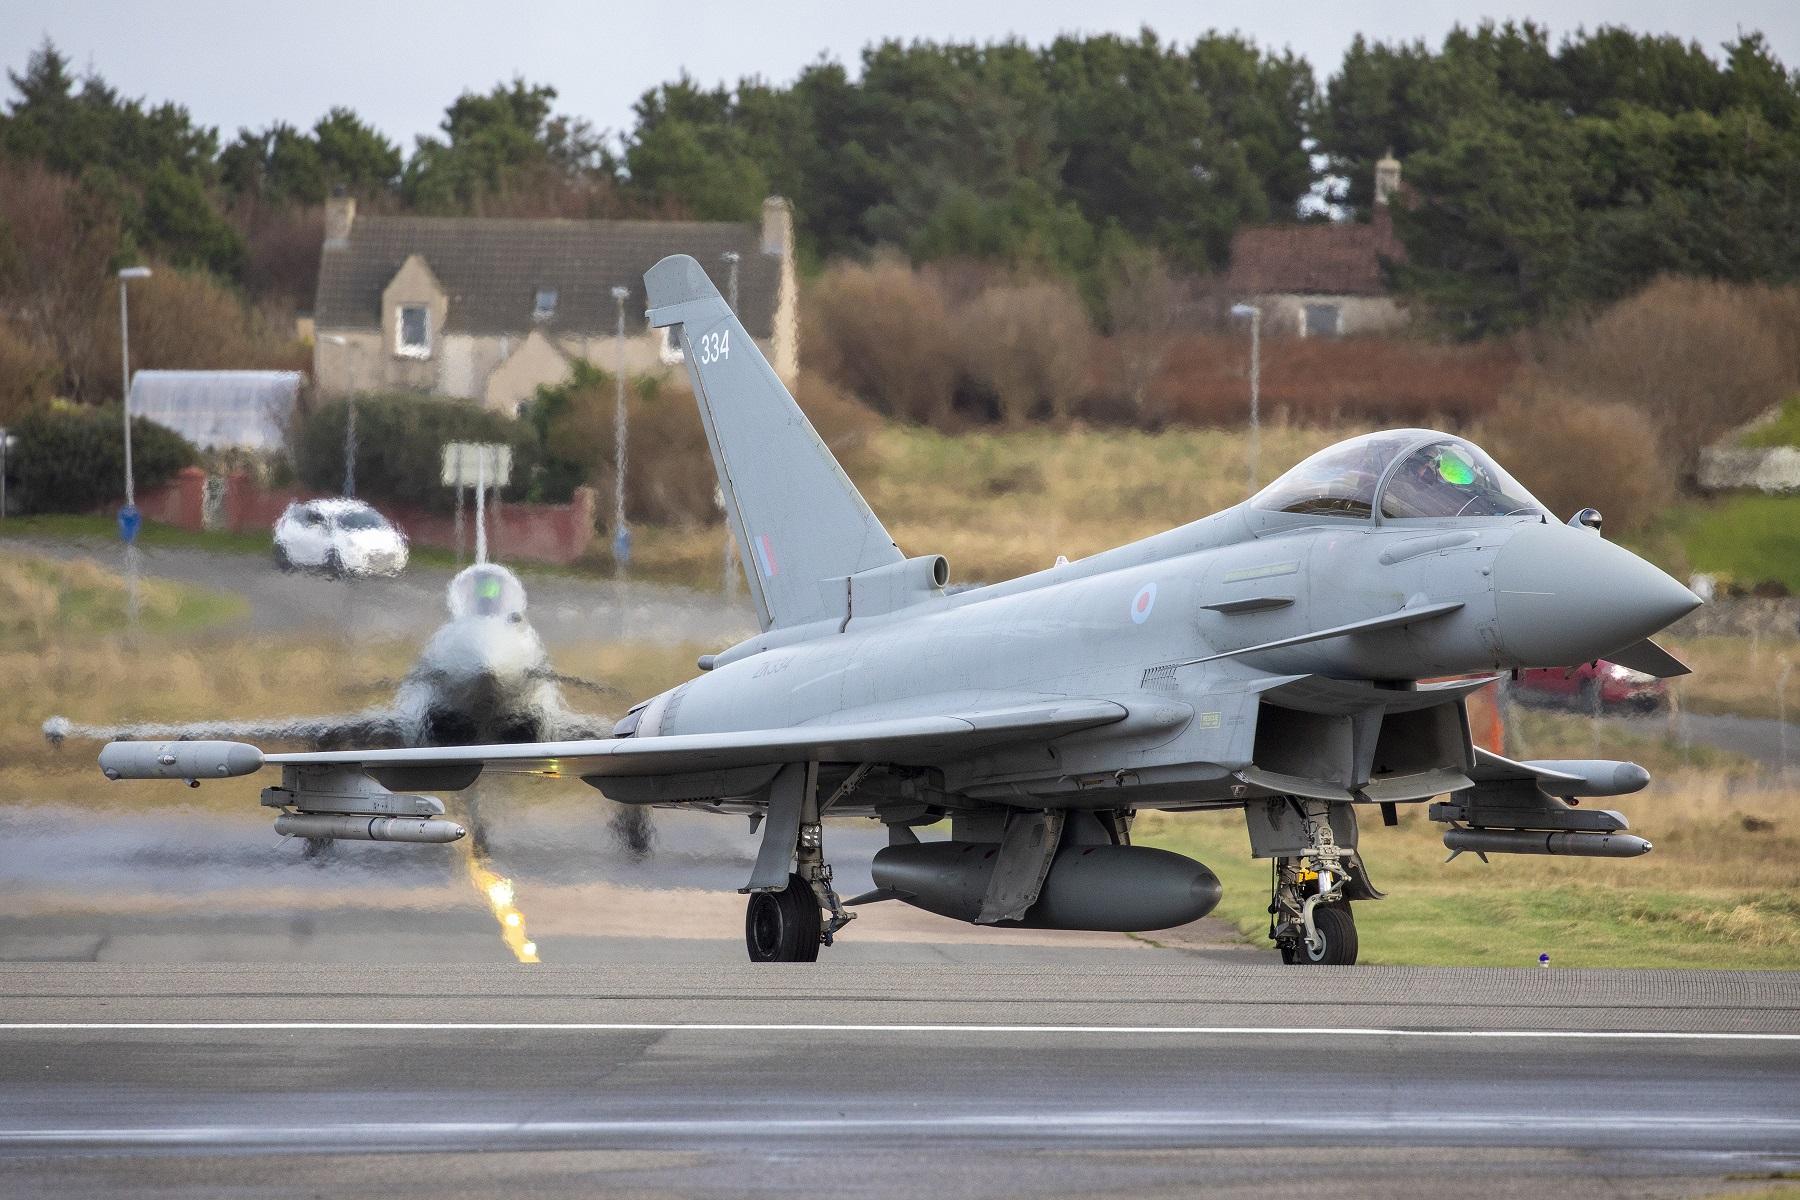 Royal Air Force Rearm and Refuel Eurofighter Typhoon Fighters in Exercise AGILE PIRATE